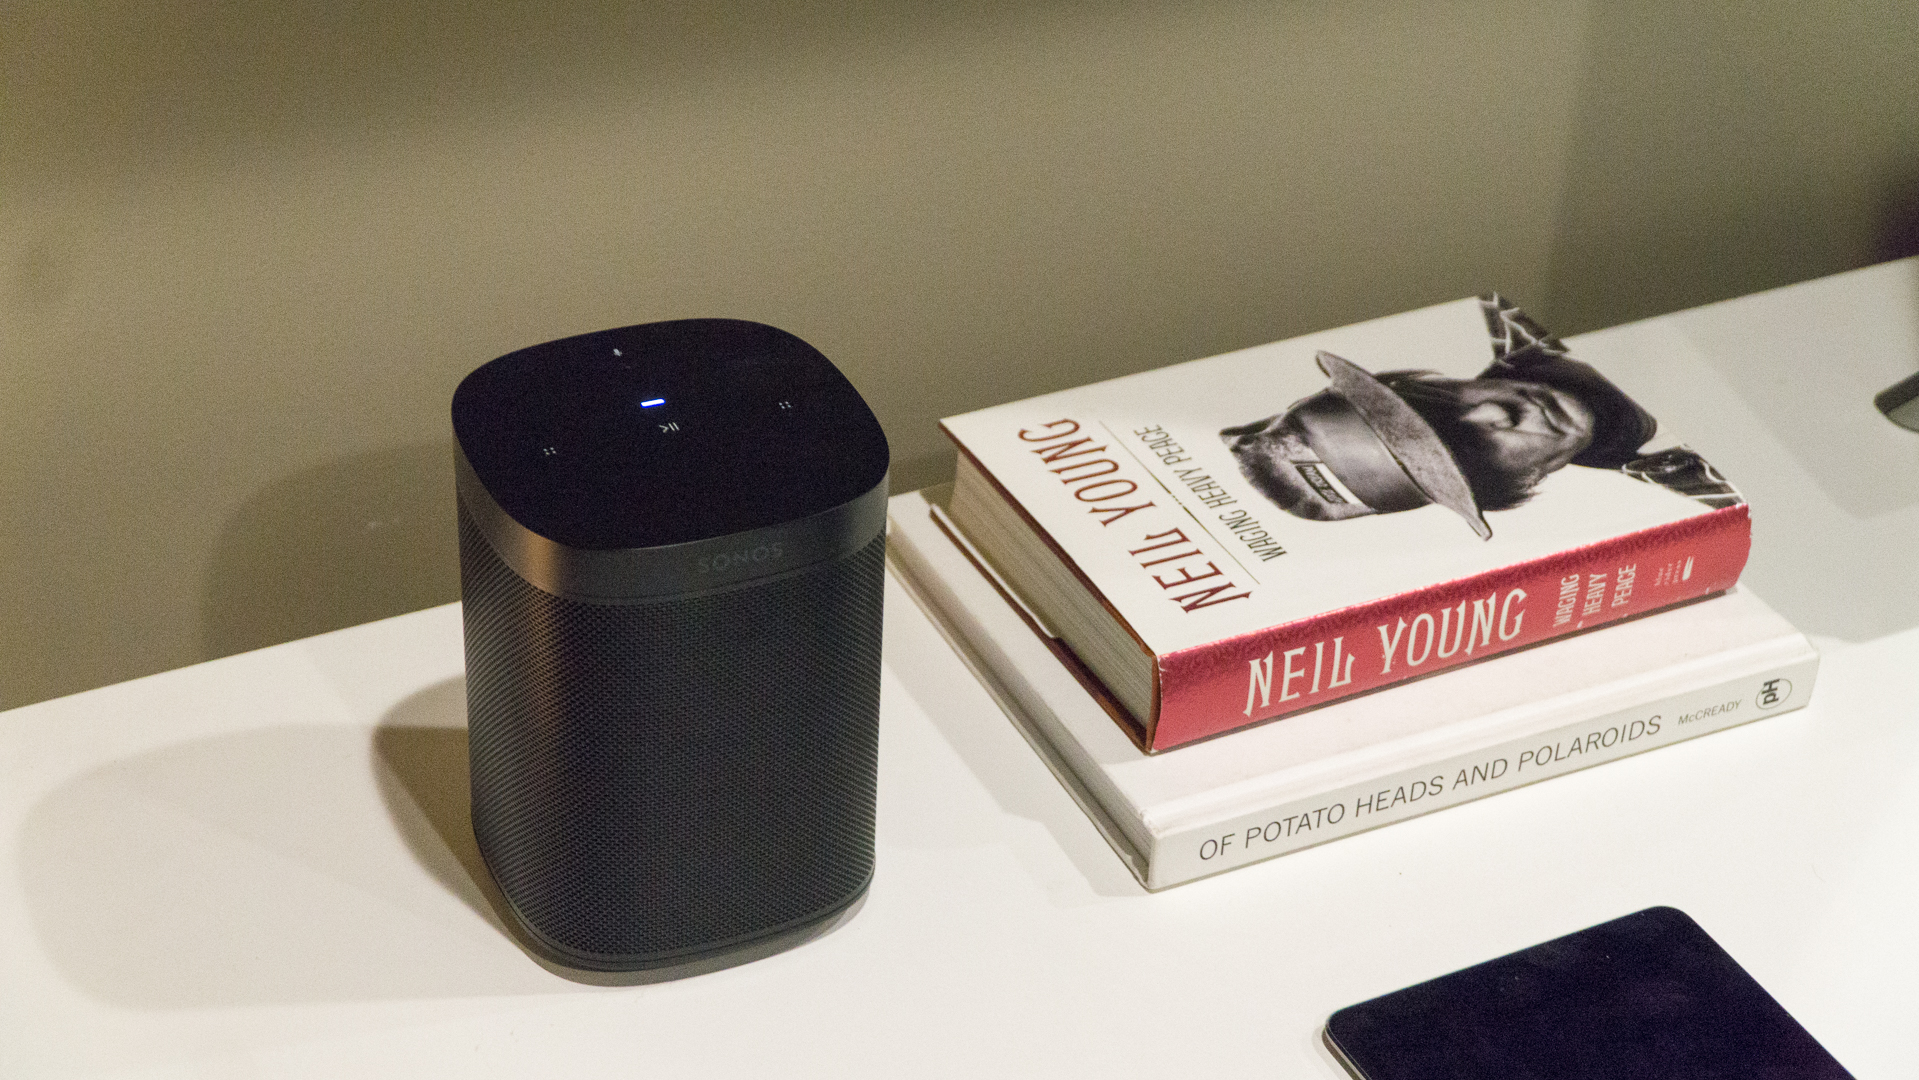 The Sonos One smart speaker in black pictured on a white surface next to a small stack of books.